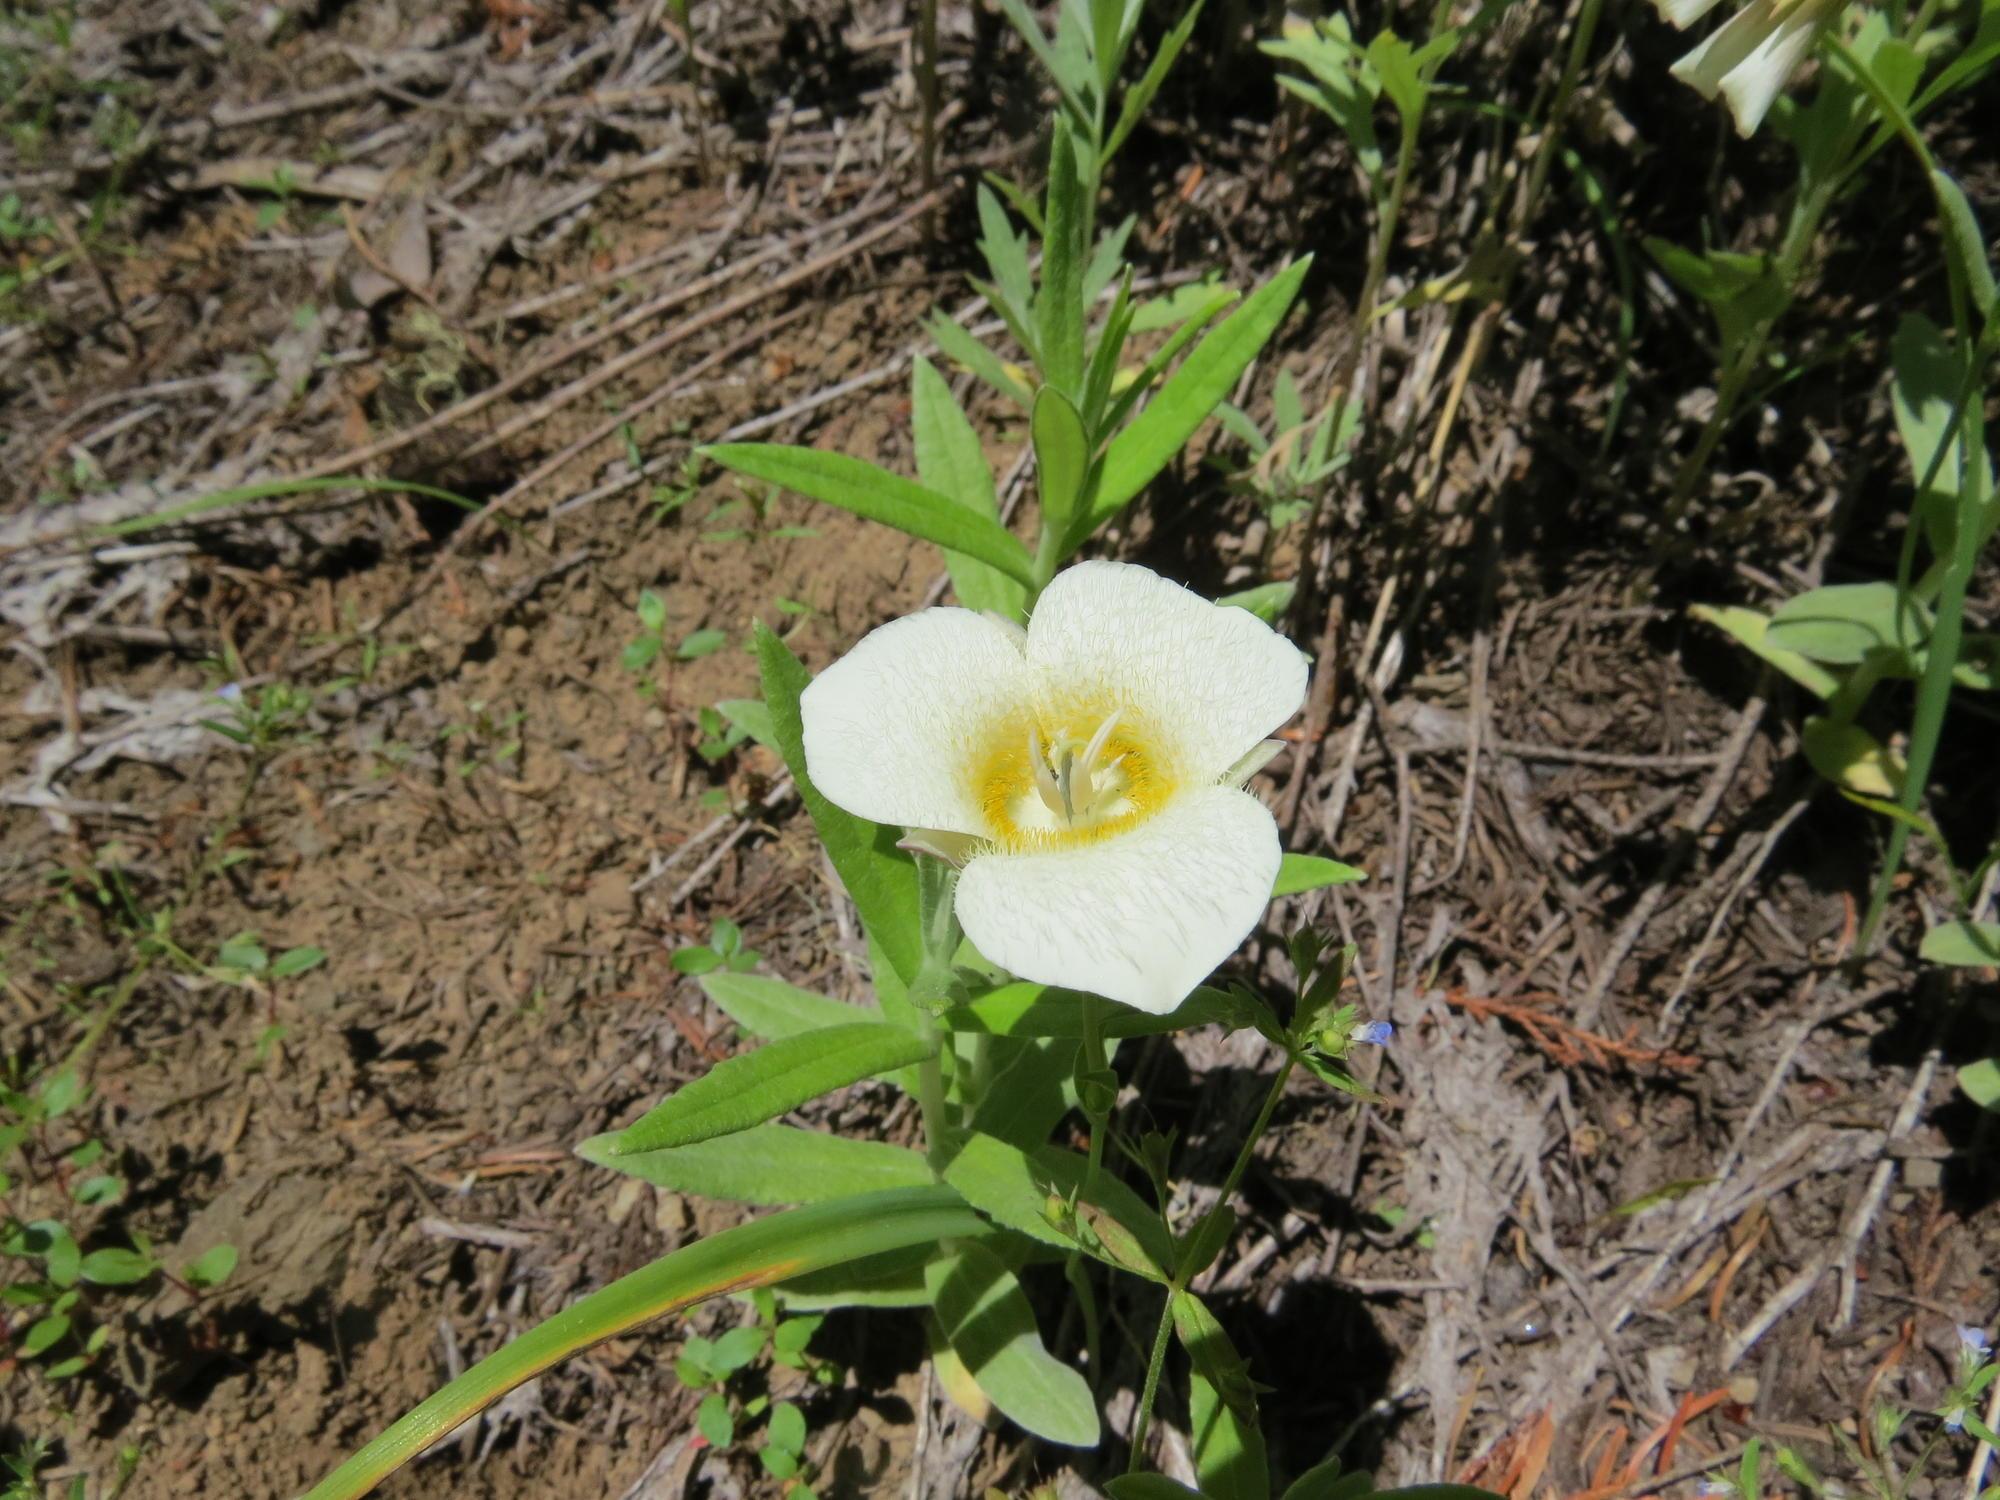 A close-up of a white mariposa lily flower.